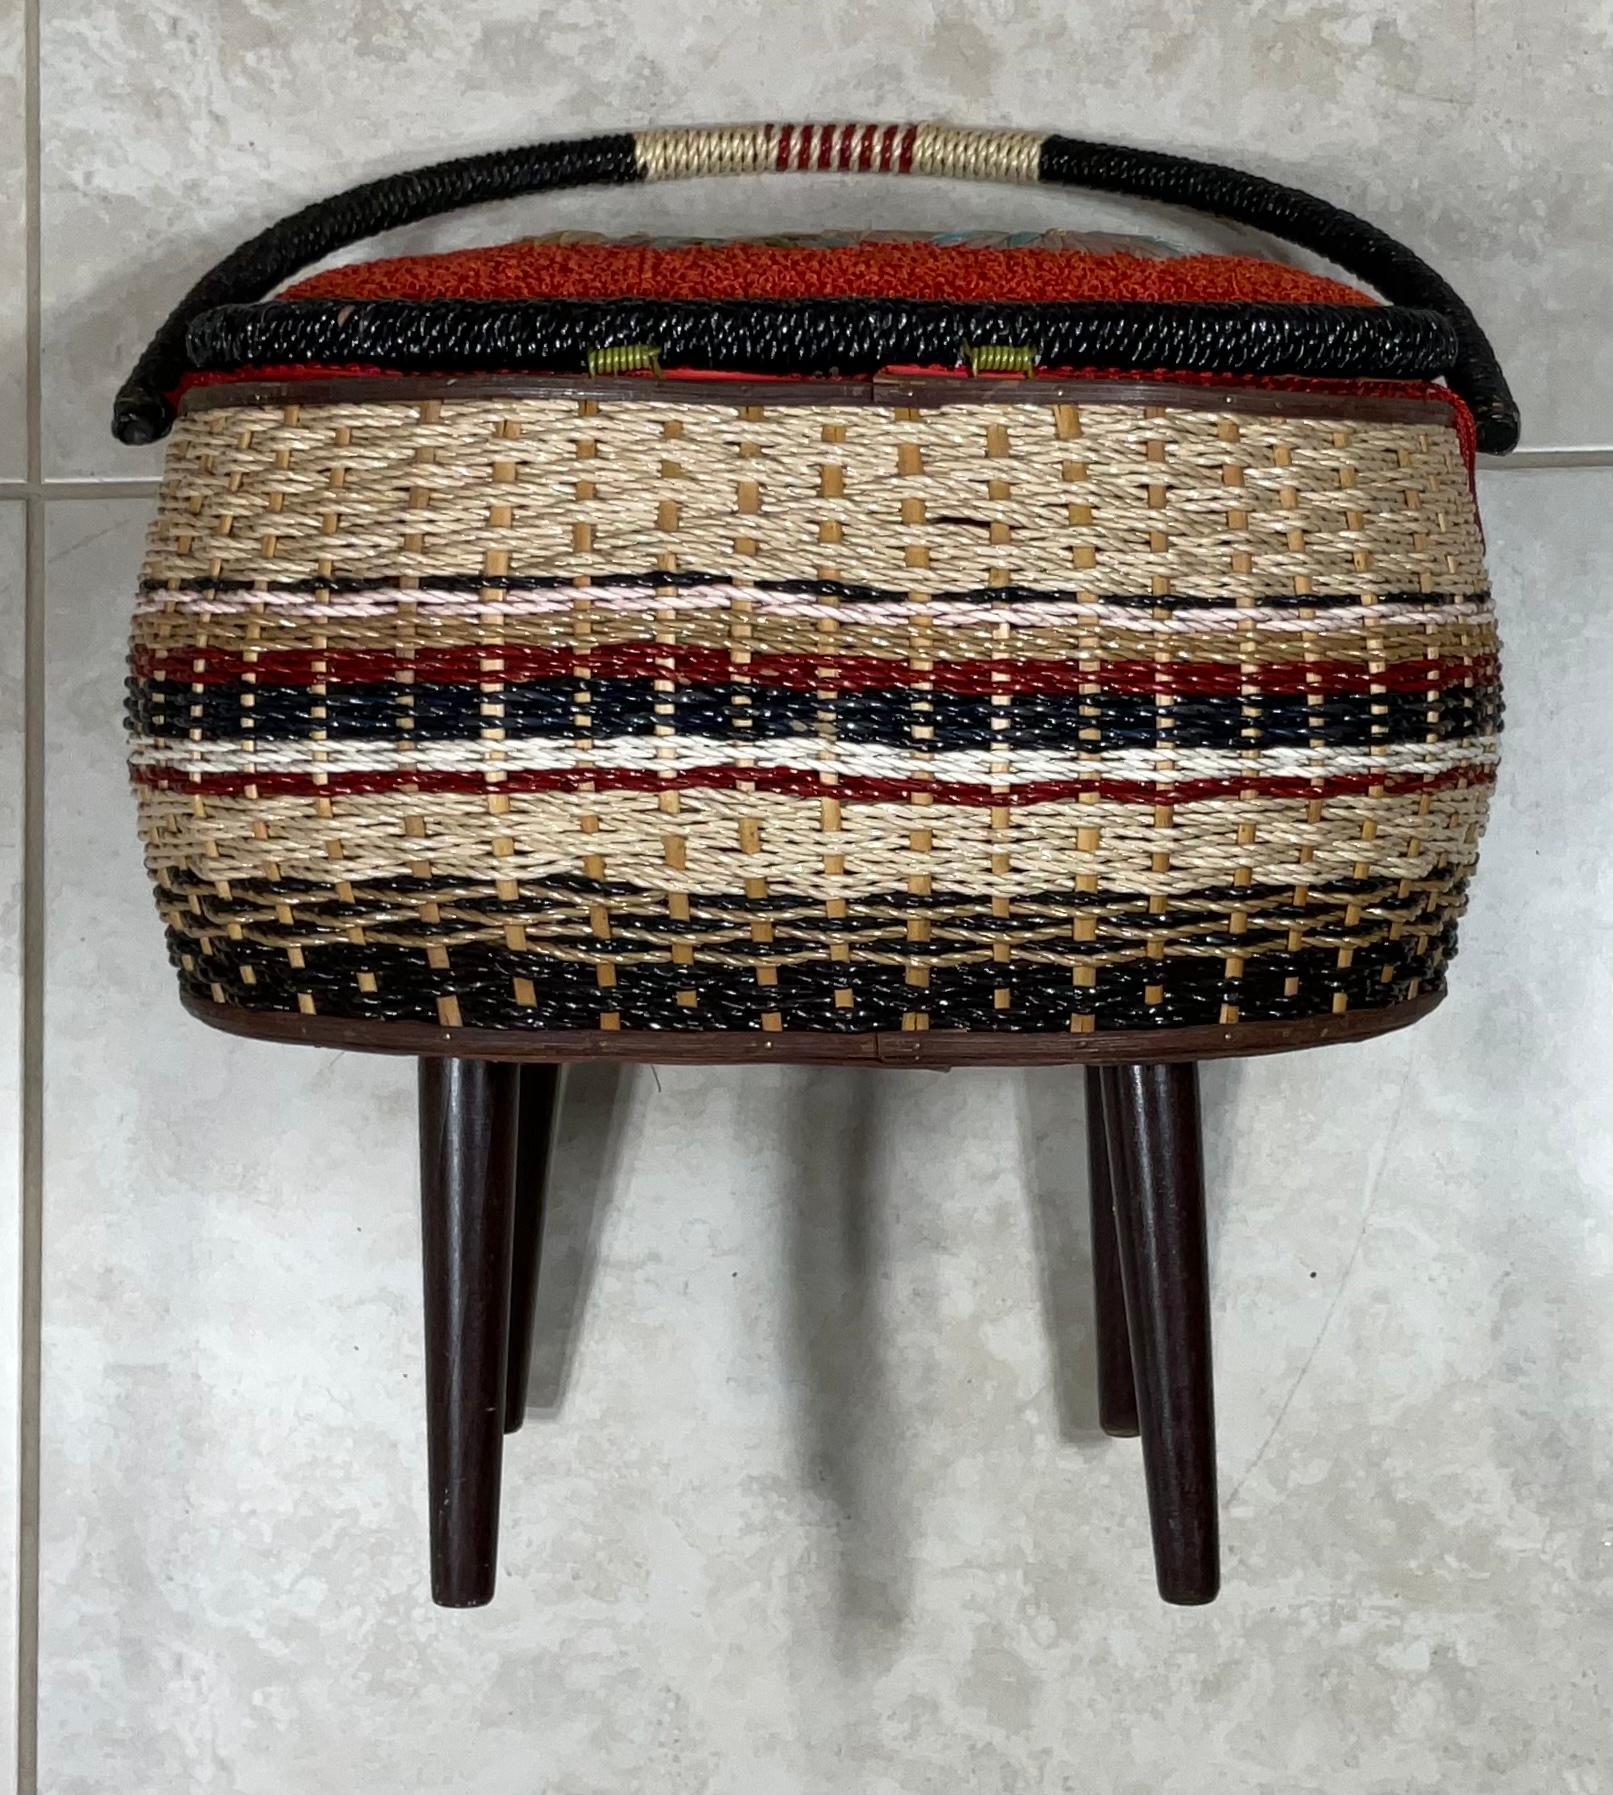 Funky Vintage Sewing Basket, Mid-Century Design In Good Condition For Sale In Delray Beach, FL